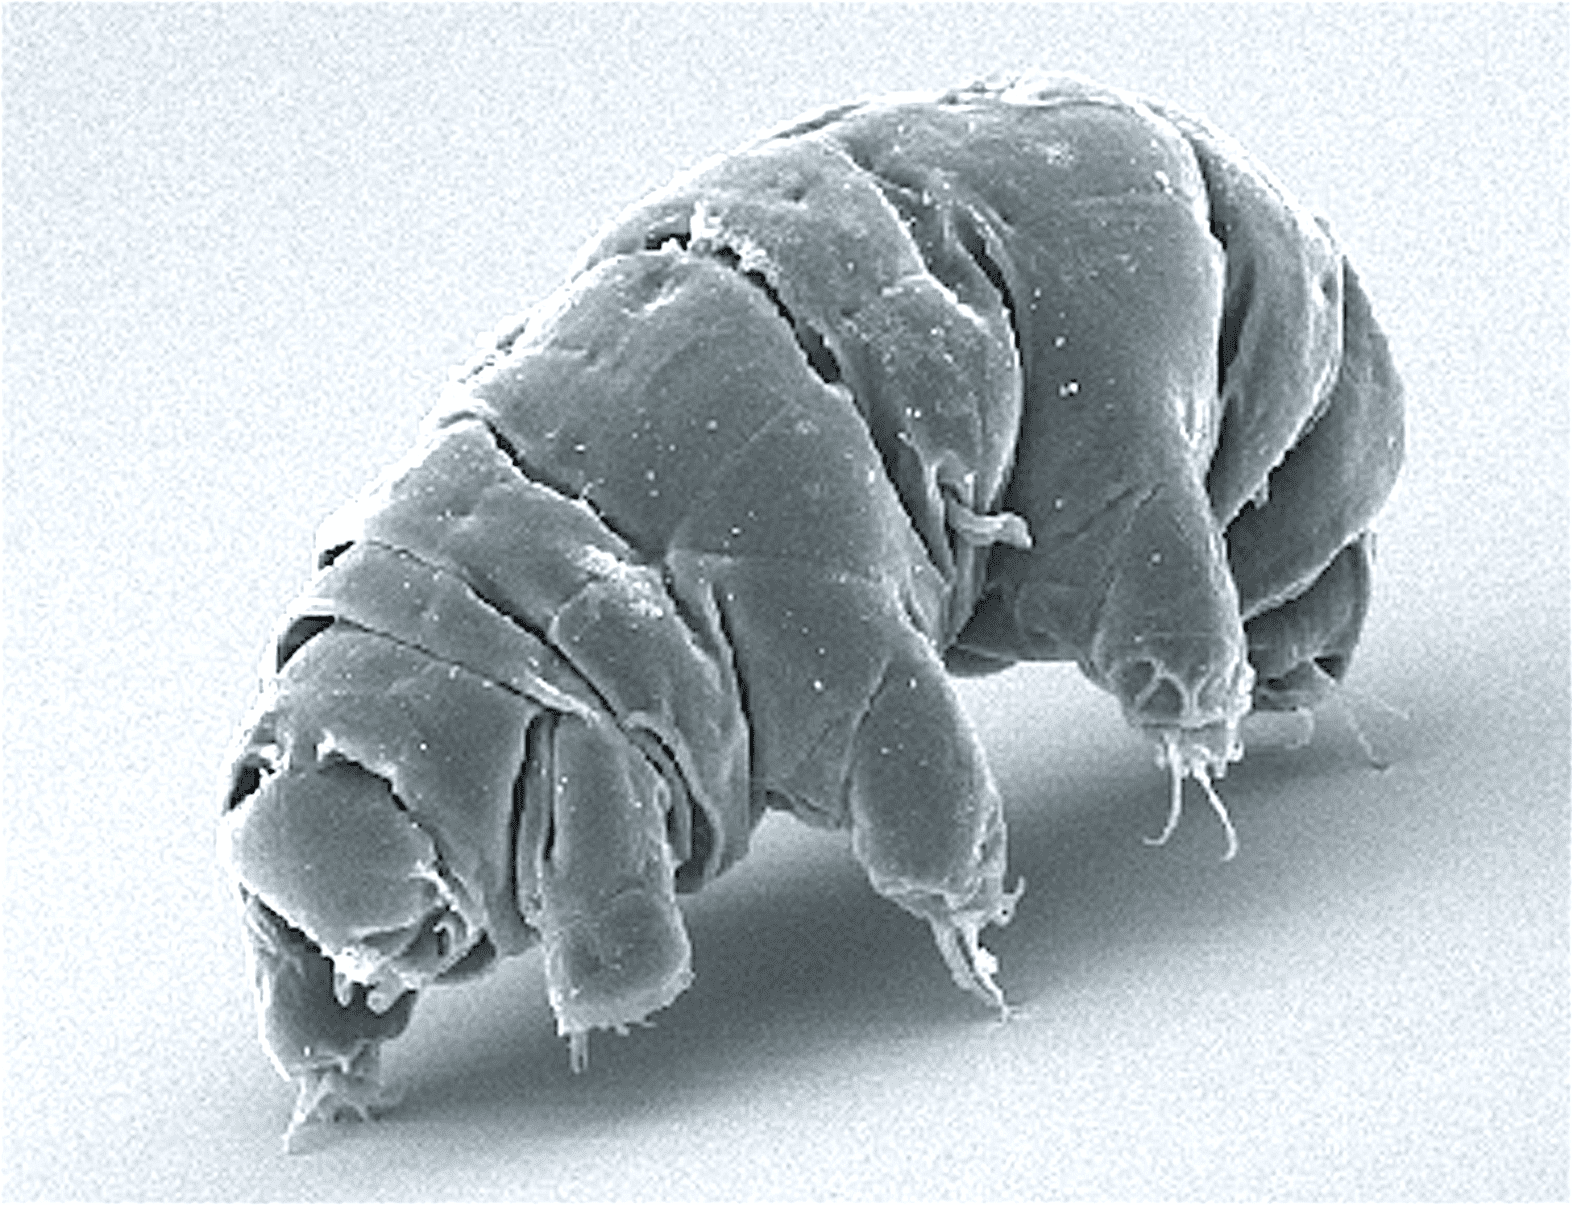 A scanning electron microscope picture of a tardigrade. Image credits: Schokraie E, Warnken U, Hotz-Wagenblatt A, Grohme MA, Hengherr S, et al. (2012) Comparative proteome analysis of Milnesium tardigradum in early embryonic state versus adults in active and anhydrobiotic state. PLoS ONE 7(9): e45682. doi:10.1371/journal.pone.0045682.